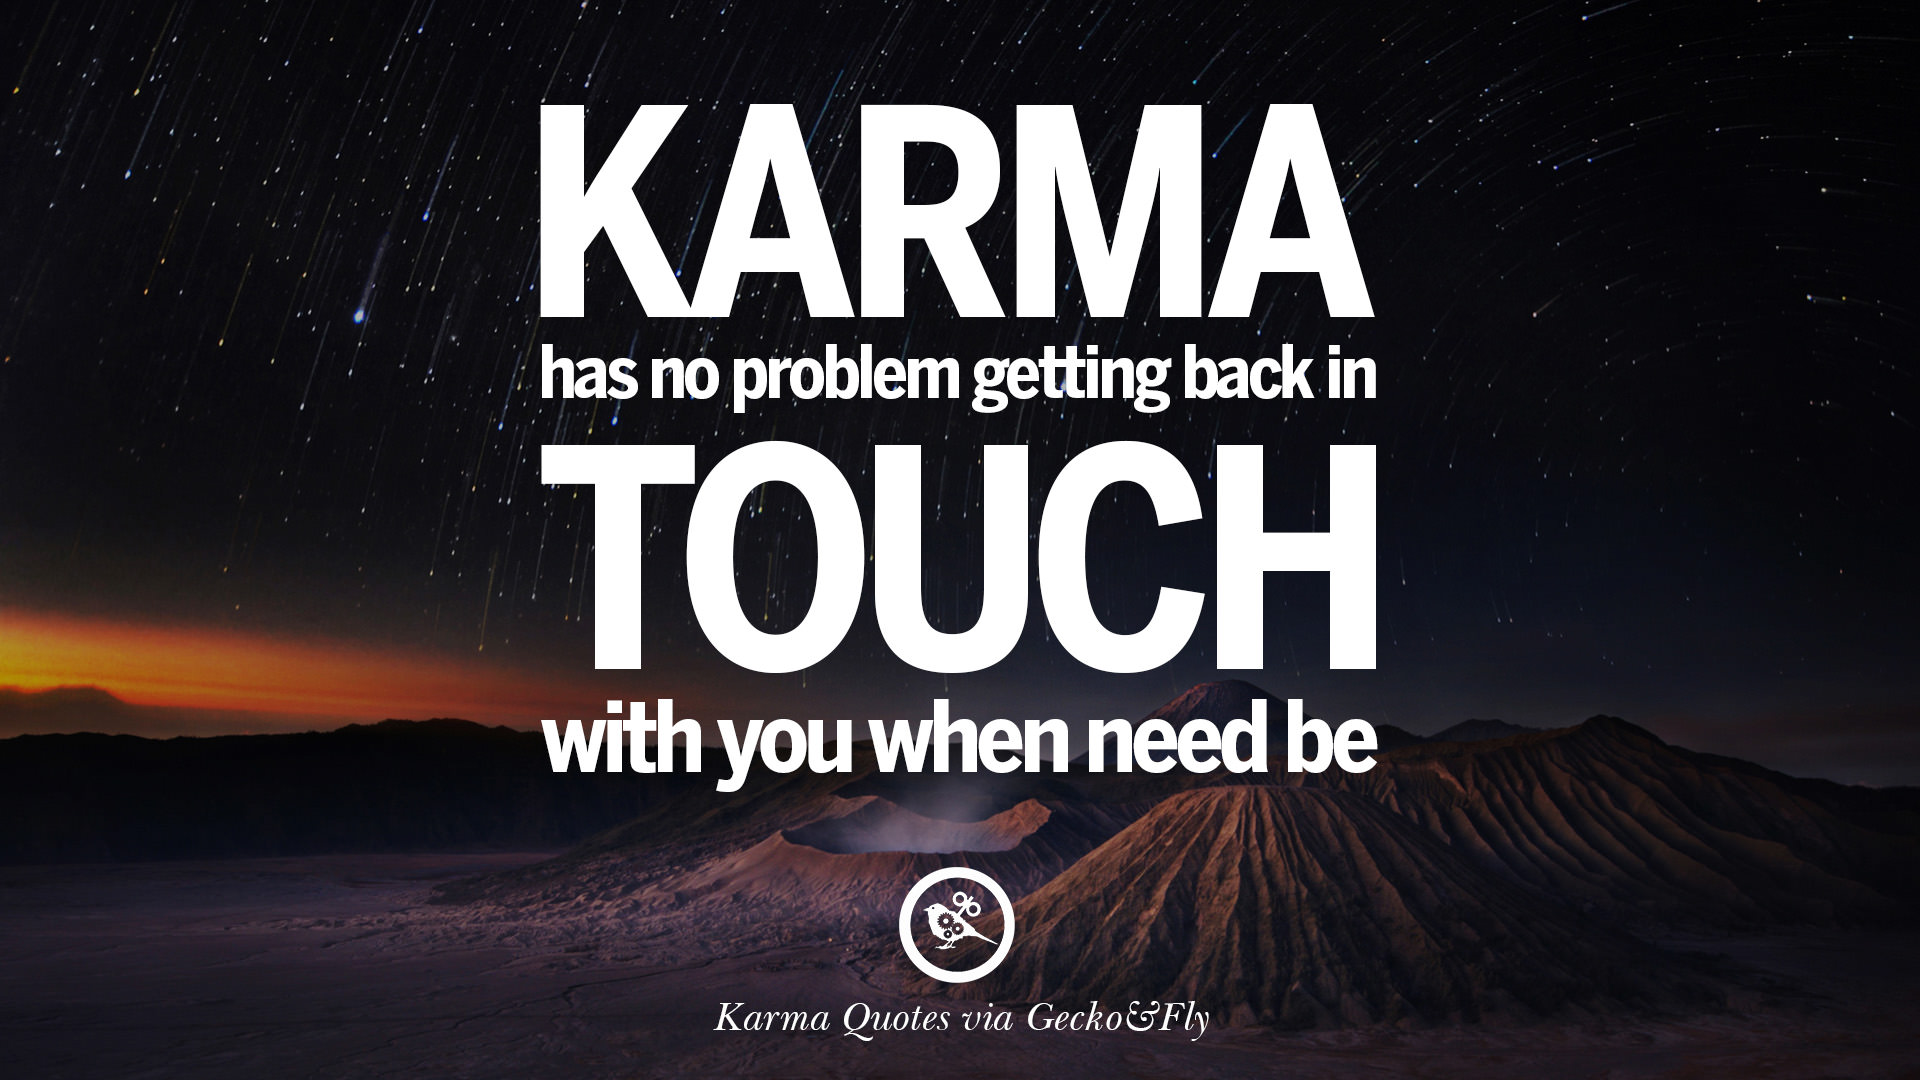 Karma quotes revenge consequences reap good sow geckoandfly